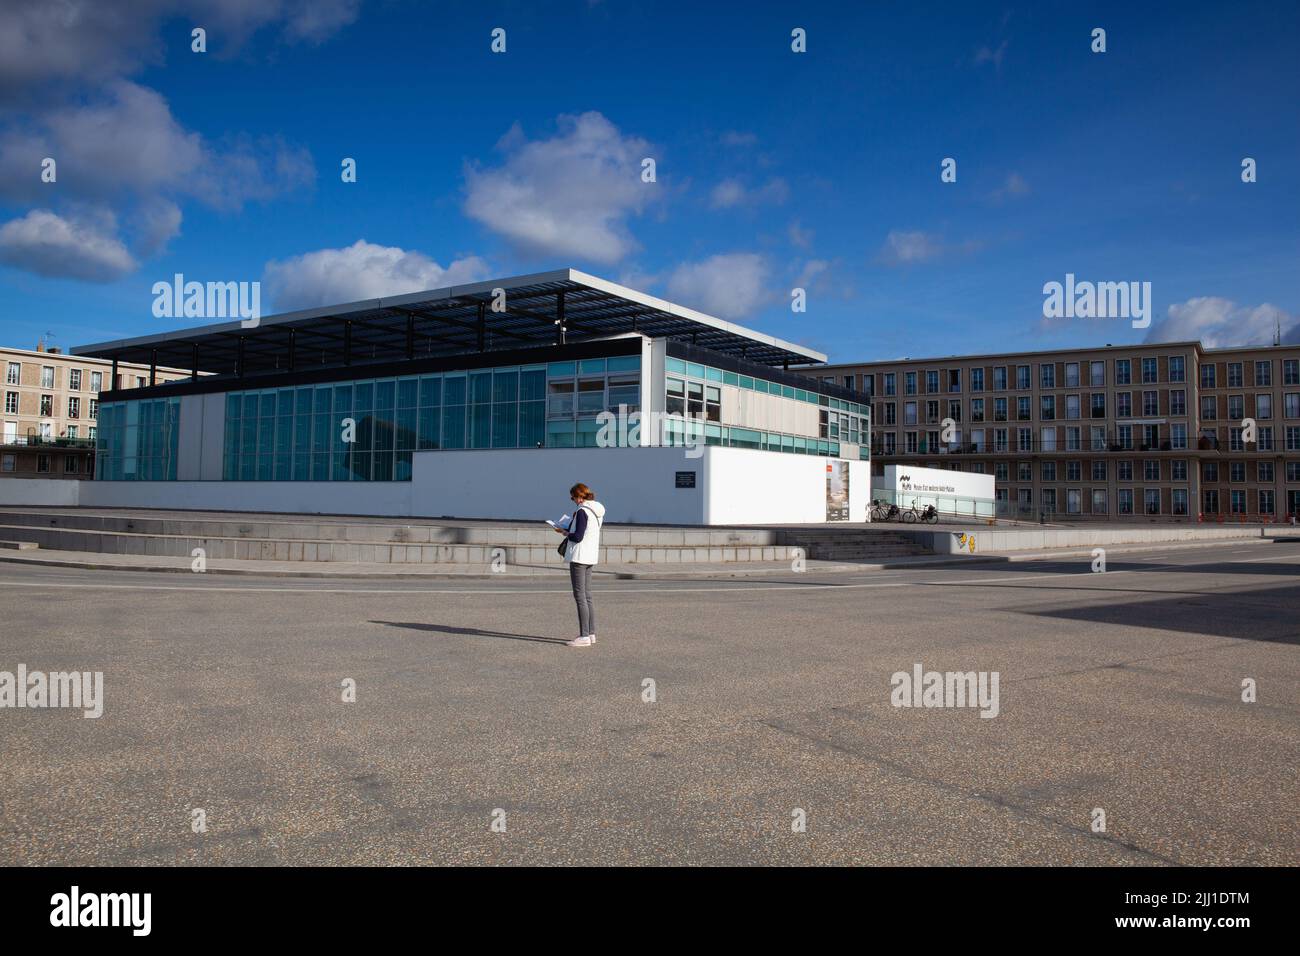 Le Havre,France - 13 October, 2021: Lonely tourist in front of Museum of Modern Art Andre Malraux in the harbor.Museum containing one of the nations m Stock Photo